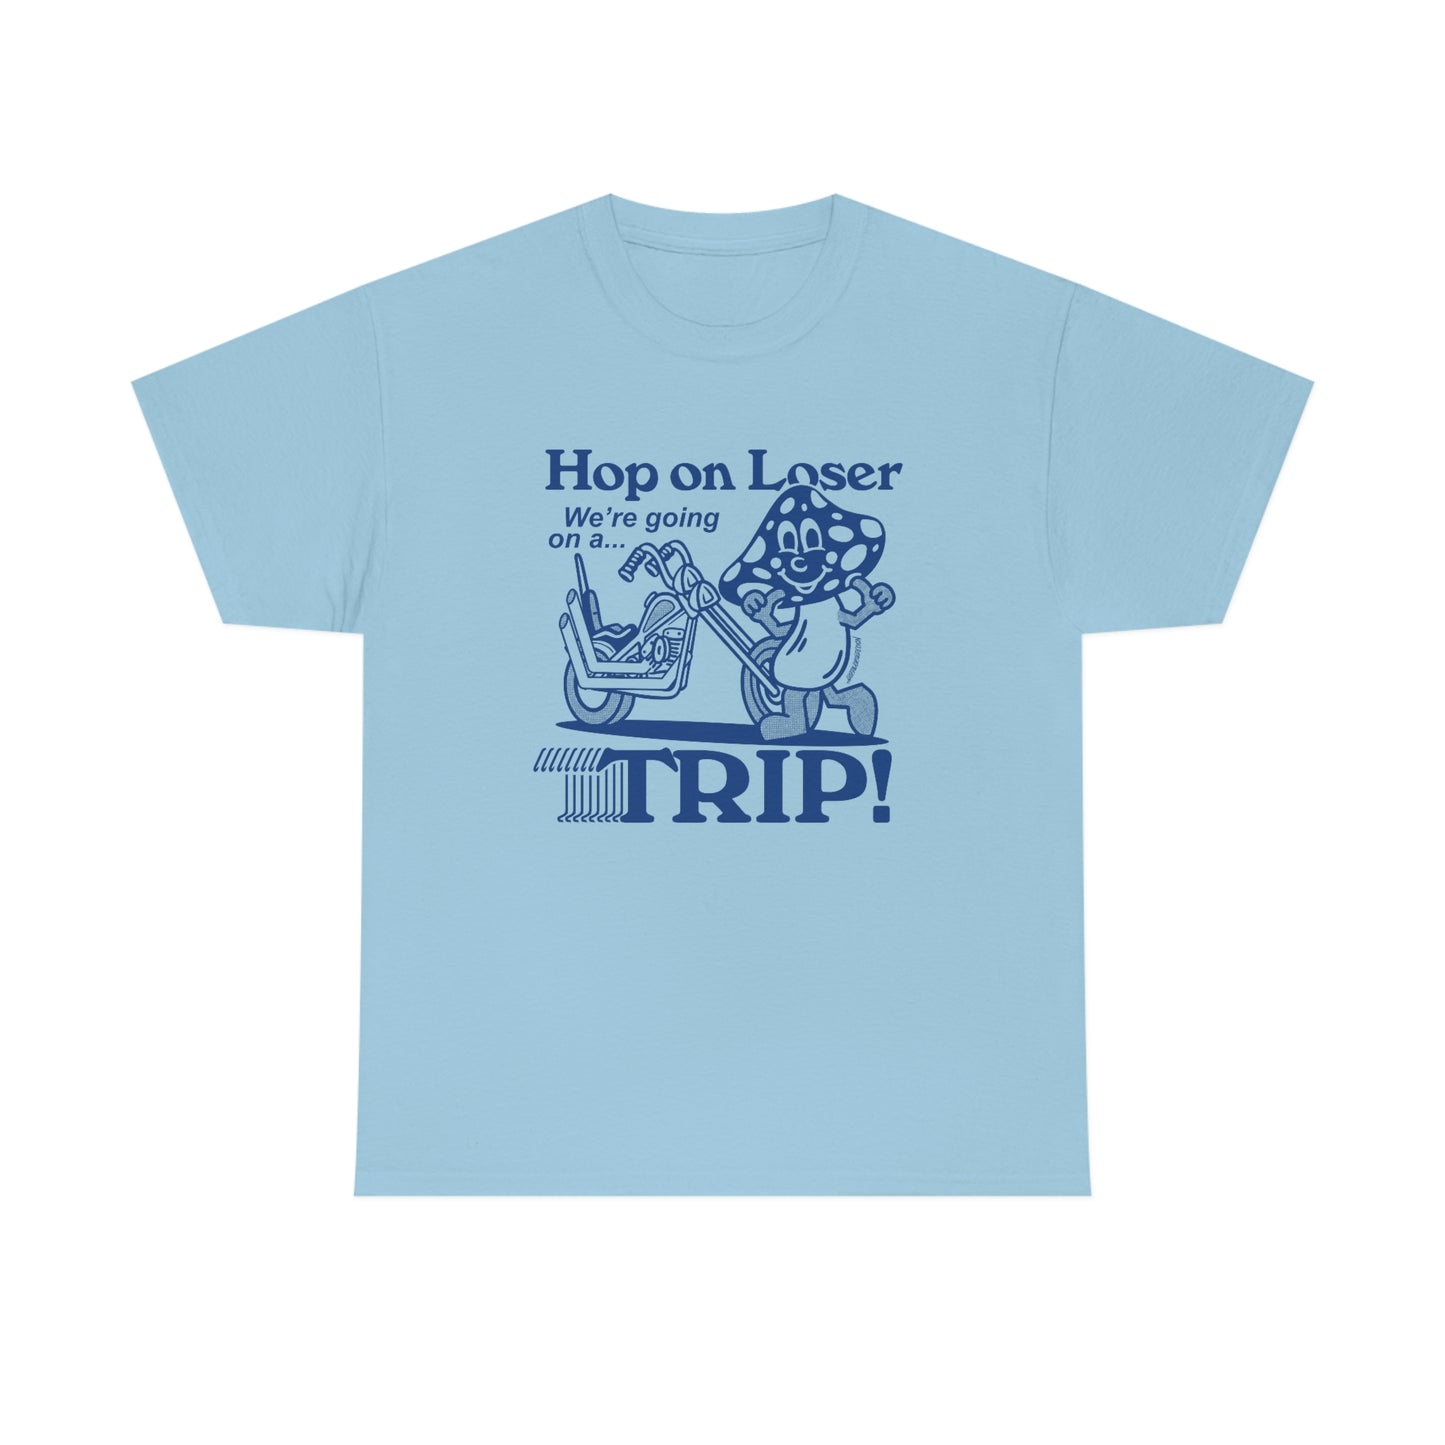 Hop on loser, we're going on a Trip - Unisex Tee